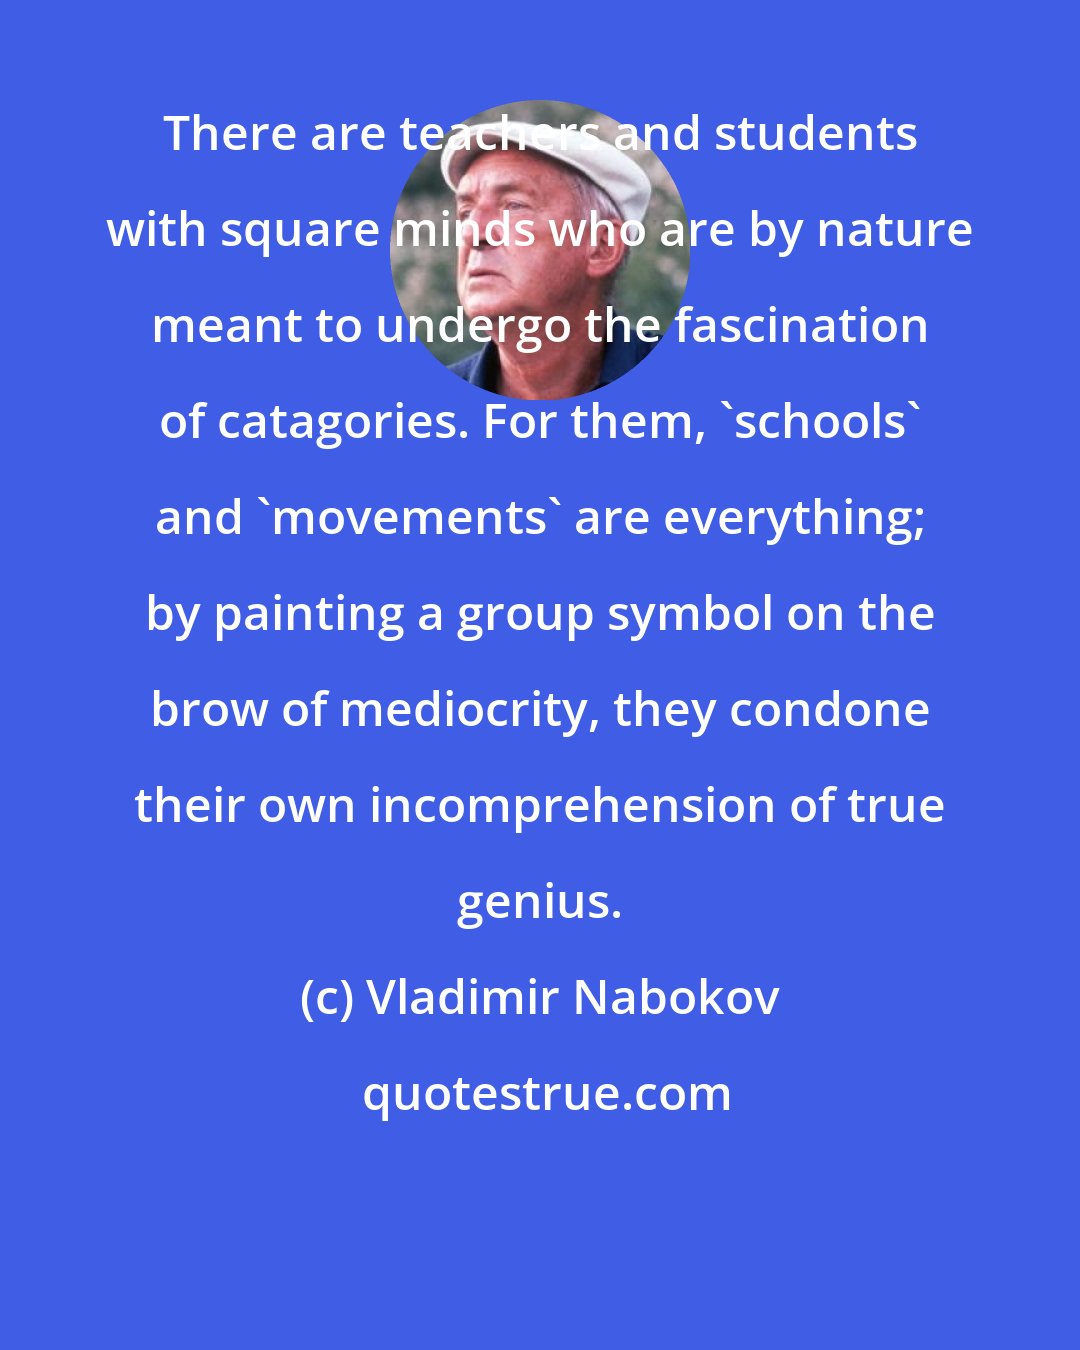 Vladimir Nabokov: There are teachers and students with square minds who are by nature meant to undergo the fascination of catagories. For them, 'schools' and 'movements' are everything; by painting a group symbol on the brow of mediocrity, they condone their own incomprehension of true genius.